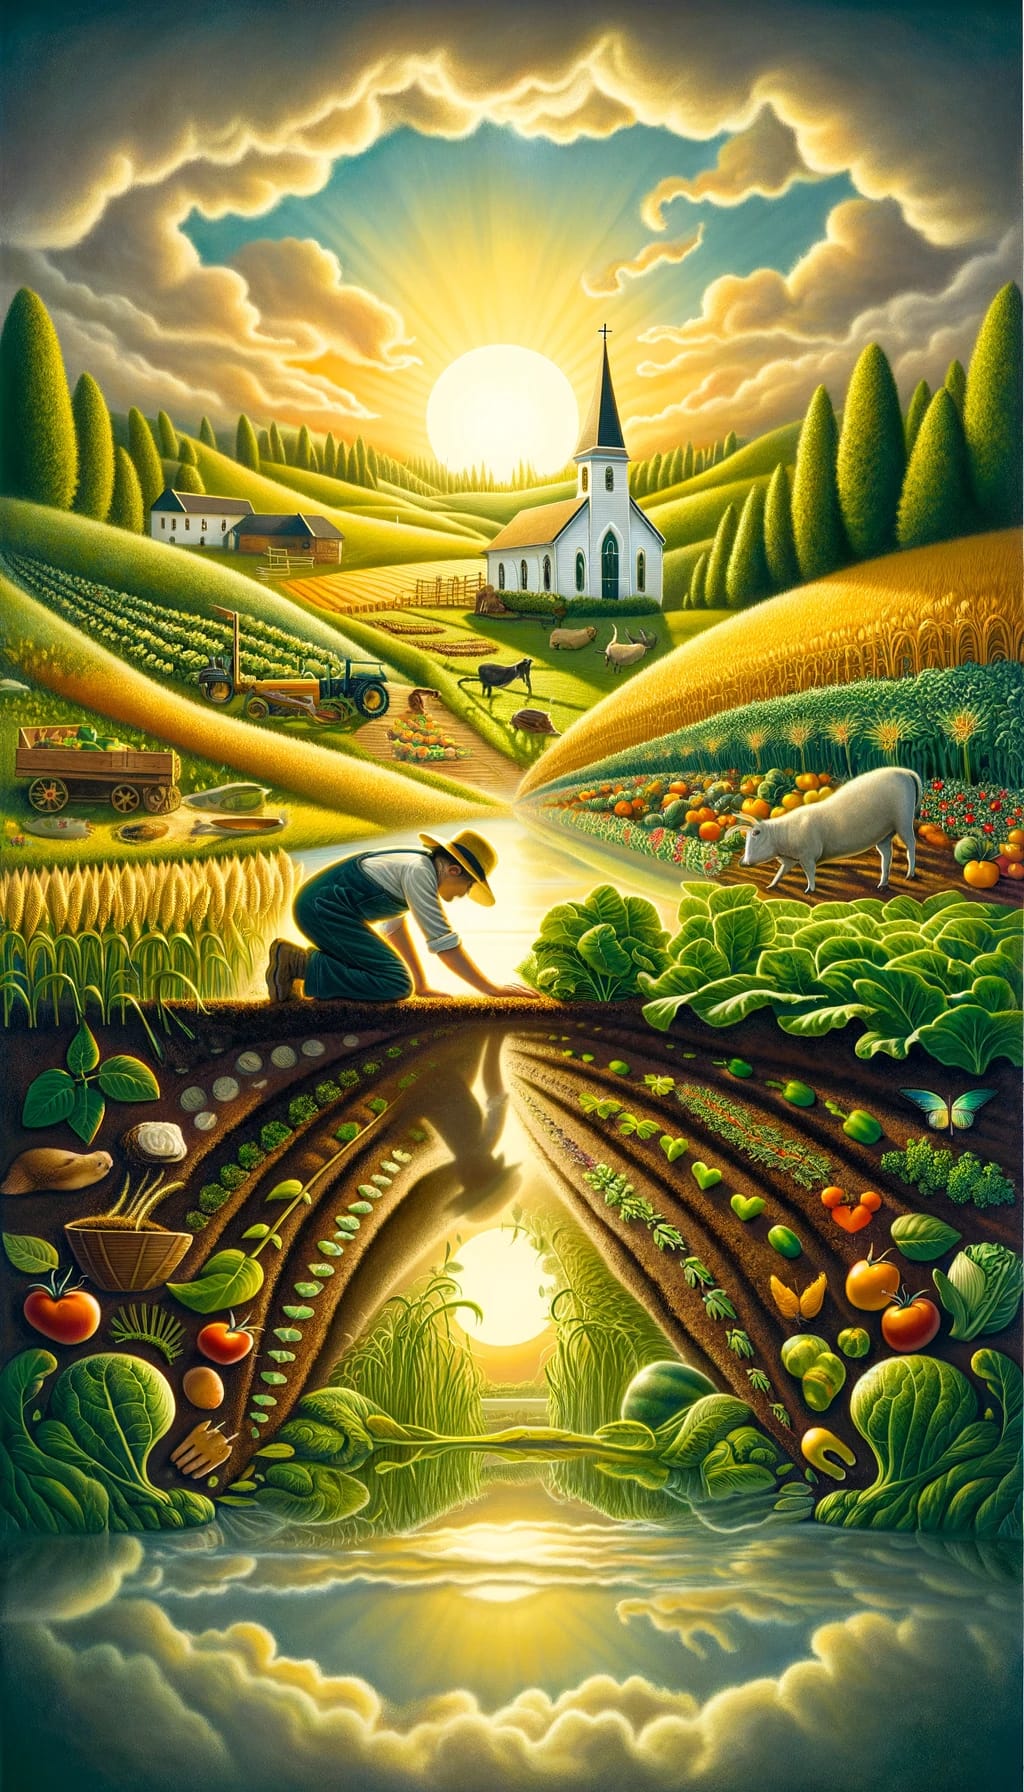 Reflecting On Food, Faith, And Stewardship A Christian Perspective On Modern Agriculture